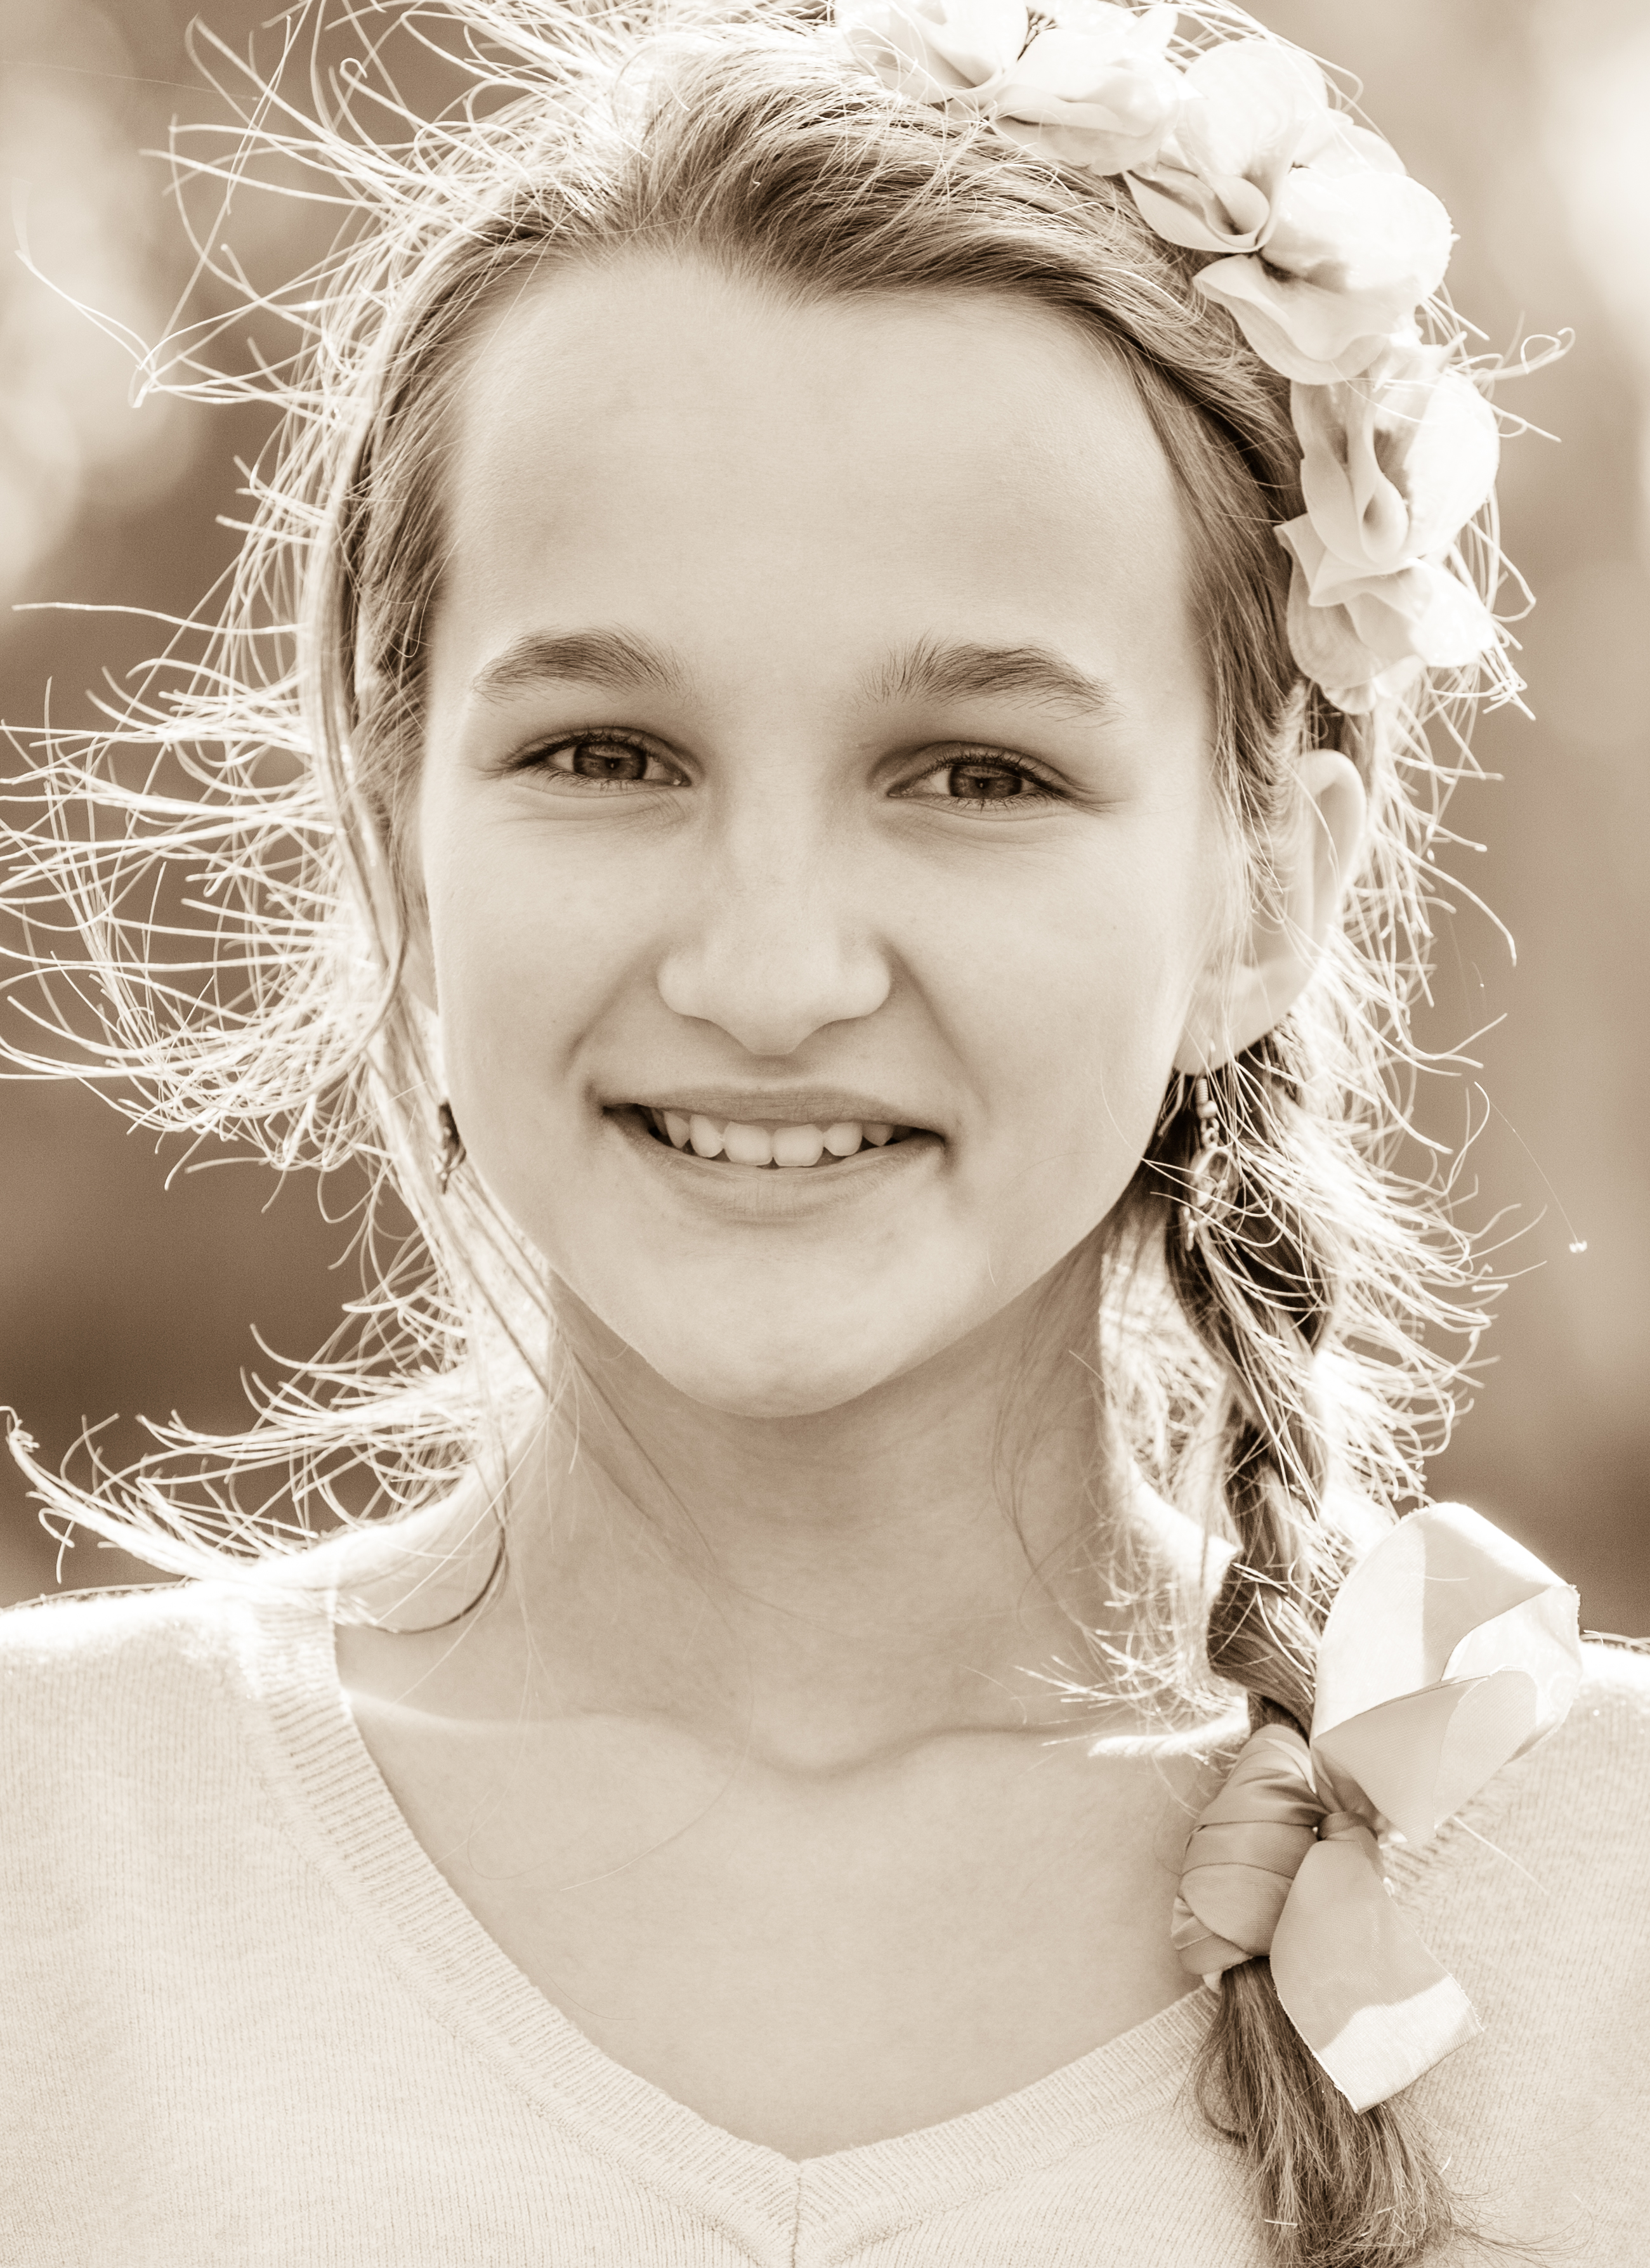 an amazing Catholic girl photographed in October 2014, picture 9, monochrome